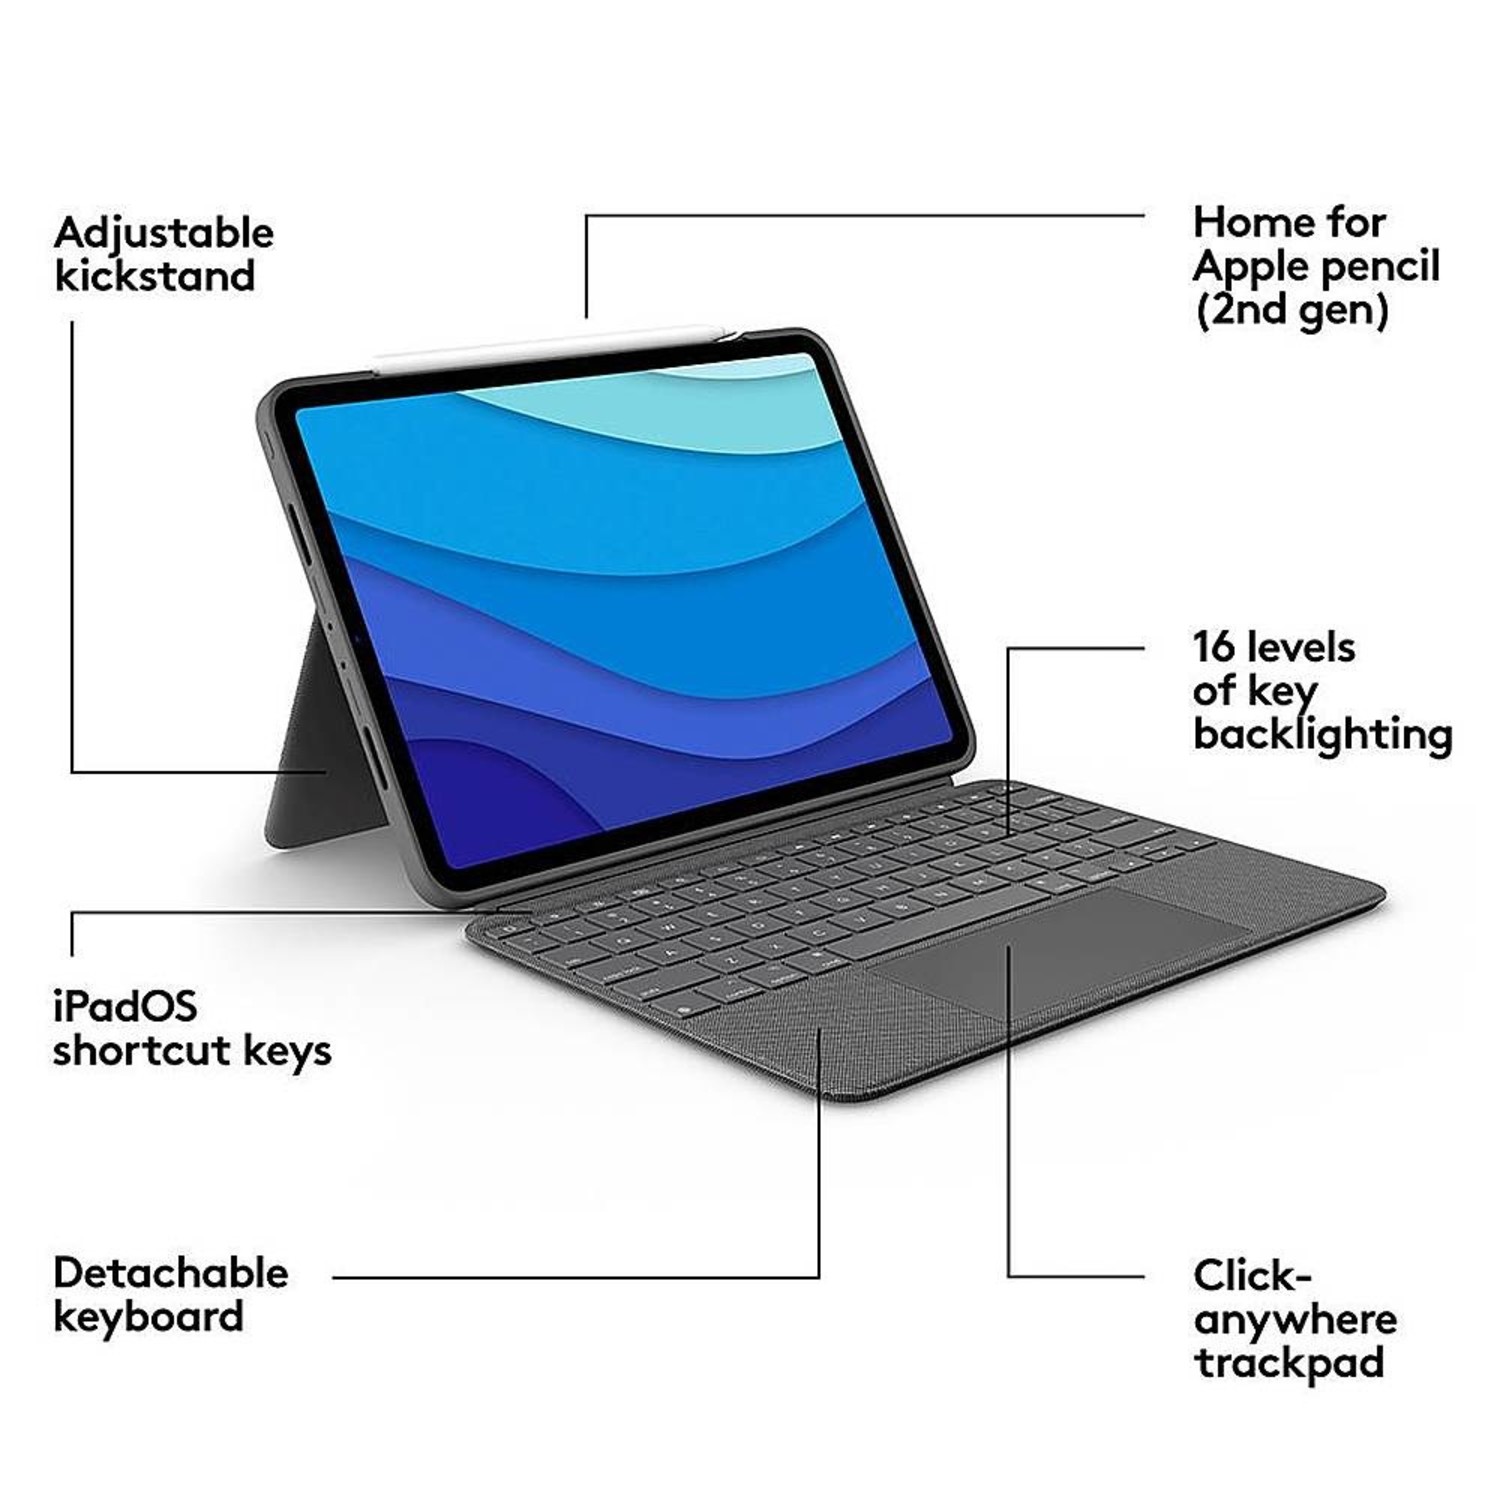 Flyve drage planer Skole lærer Combo Touch Keyboard Case with Trackpad for iPad Pro 11-inch (1st, 2nd, 3rd  gen) - Department Purchasing - Campus Computer Store